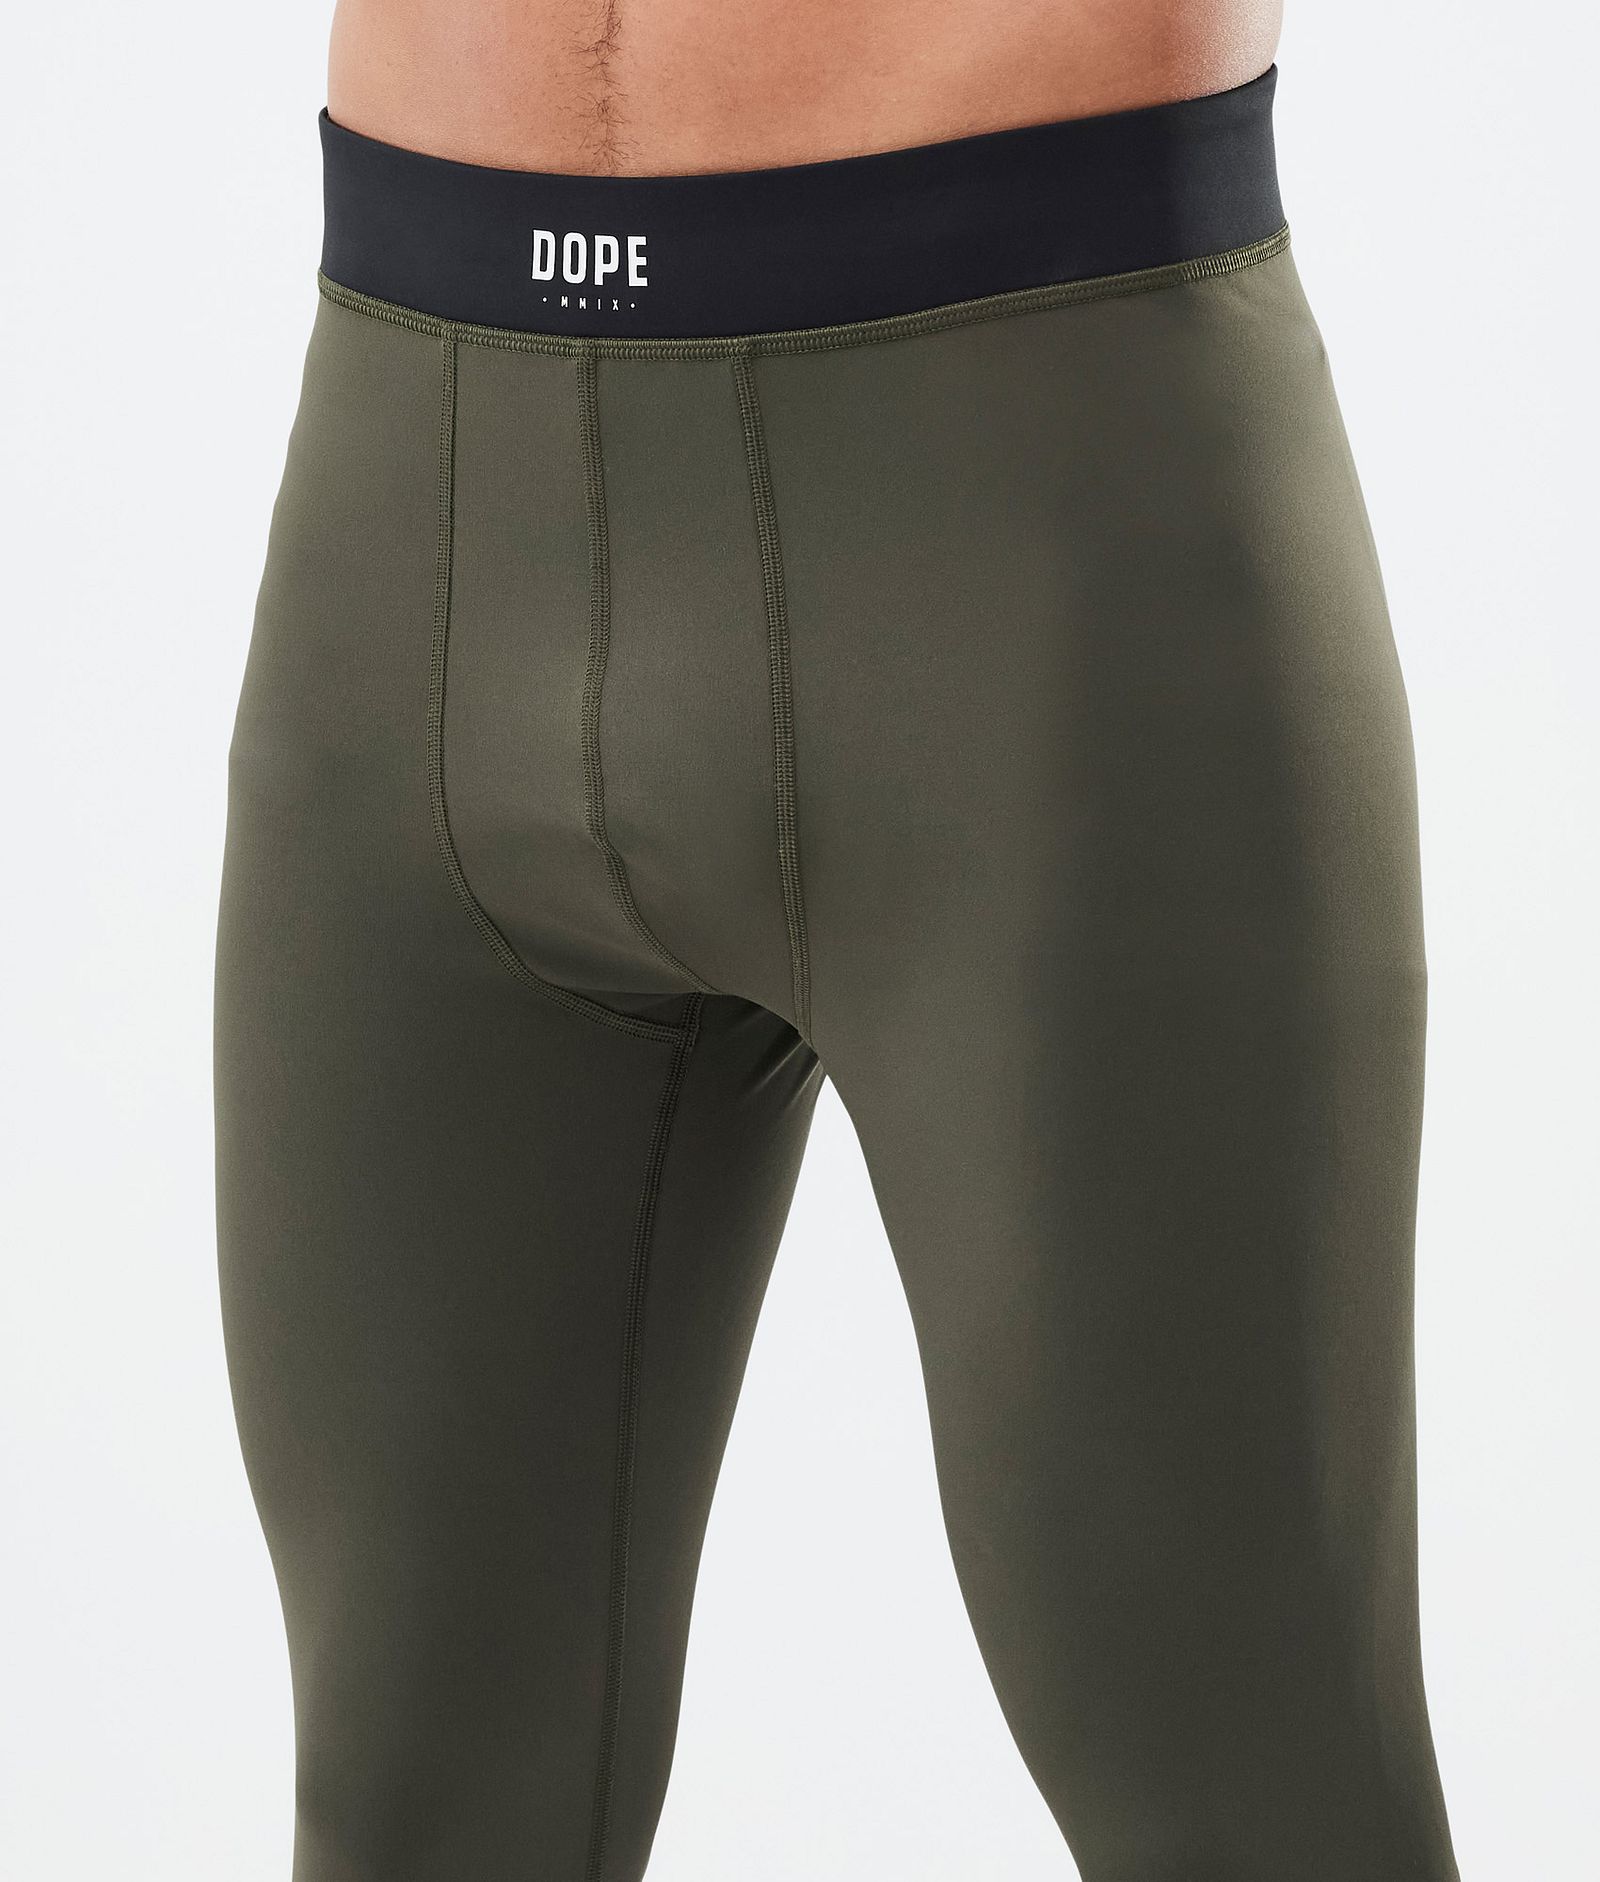 Dope Snuggle Base Layer Pant Men 2X-Up Olive Green